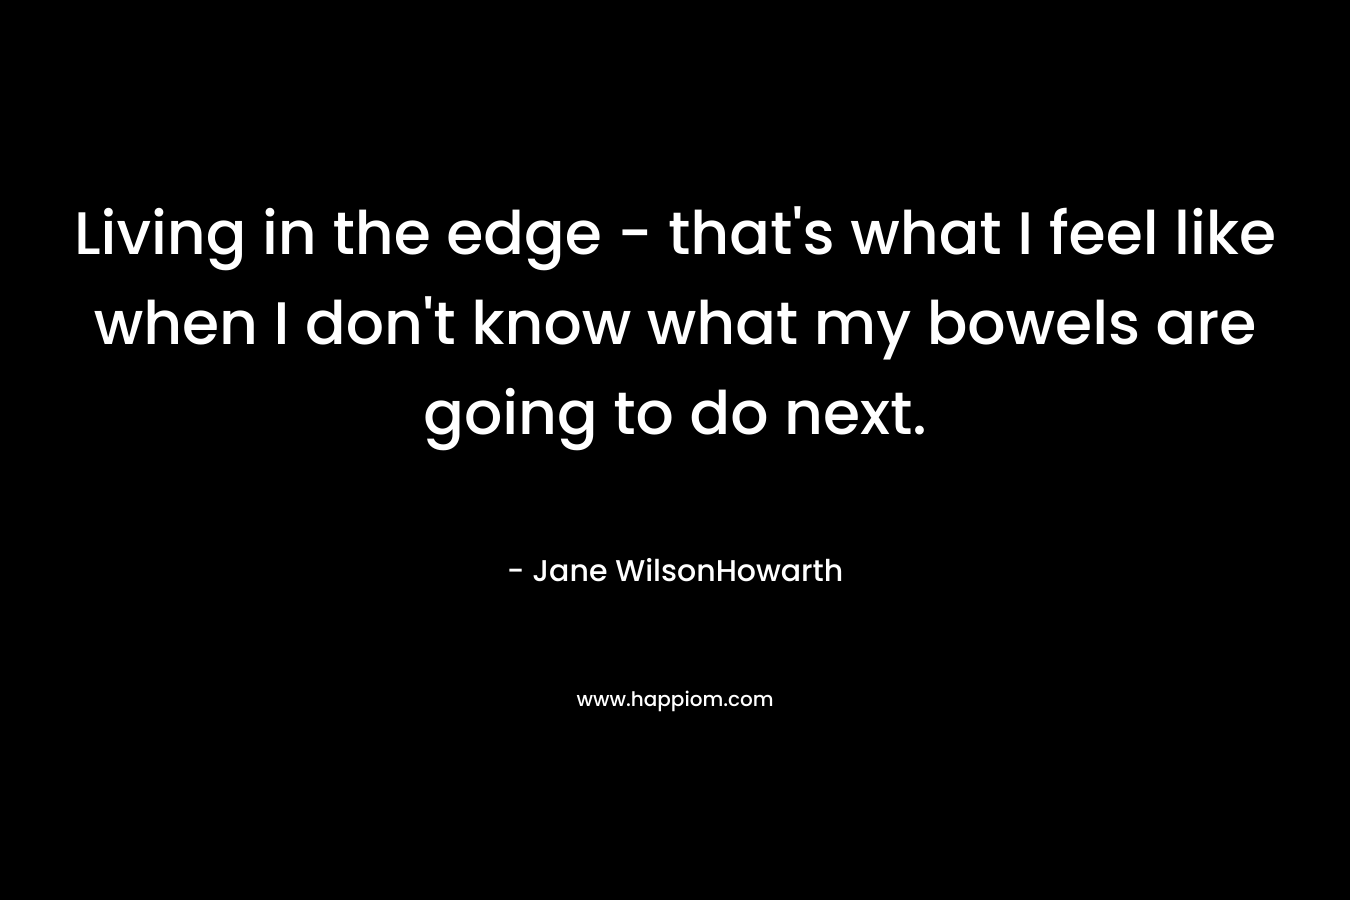 Living in the edge – that’s what I feel like when I don’t know what my bowels are going to do next. – Jane WilsonHowarth